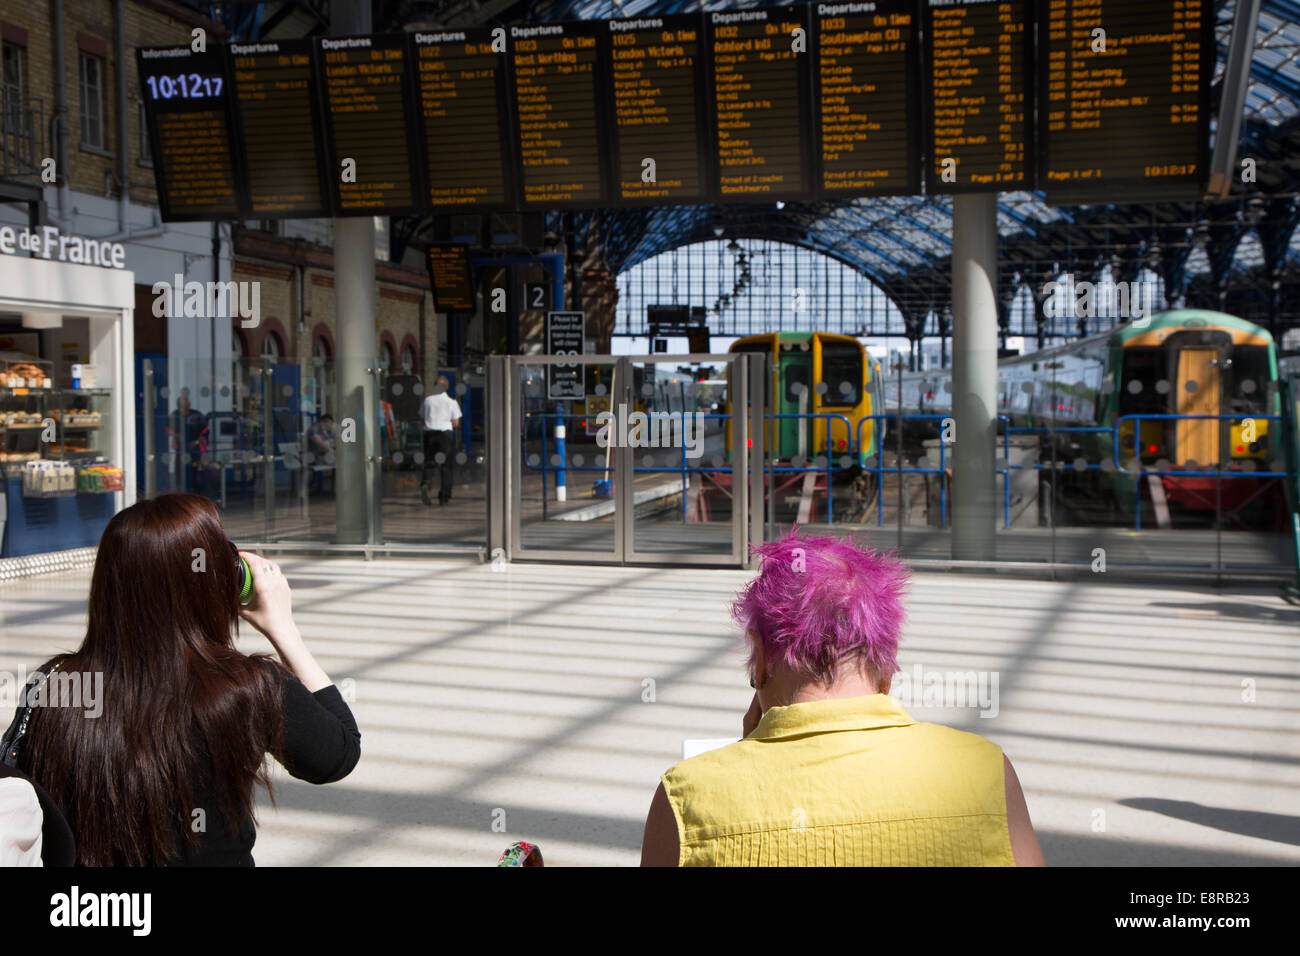 Passengers wait for train information on the concourse at Brighton Train Station. One of the ladies has distinctive pink hair. Stock Photo